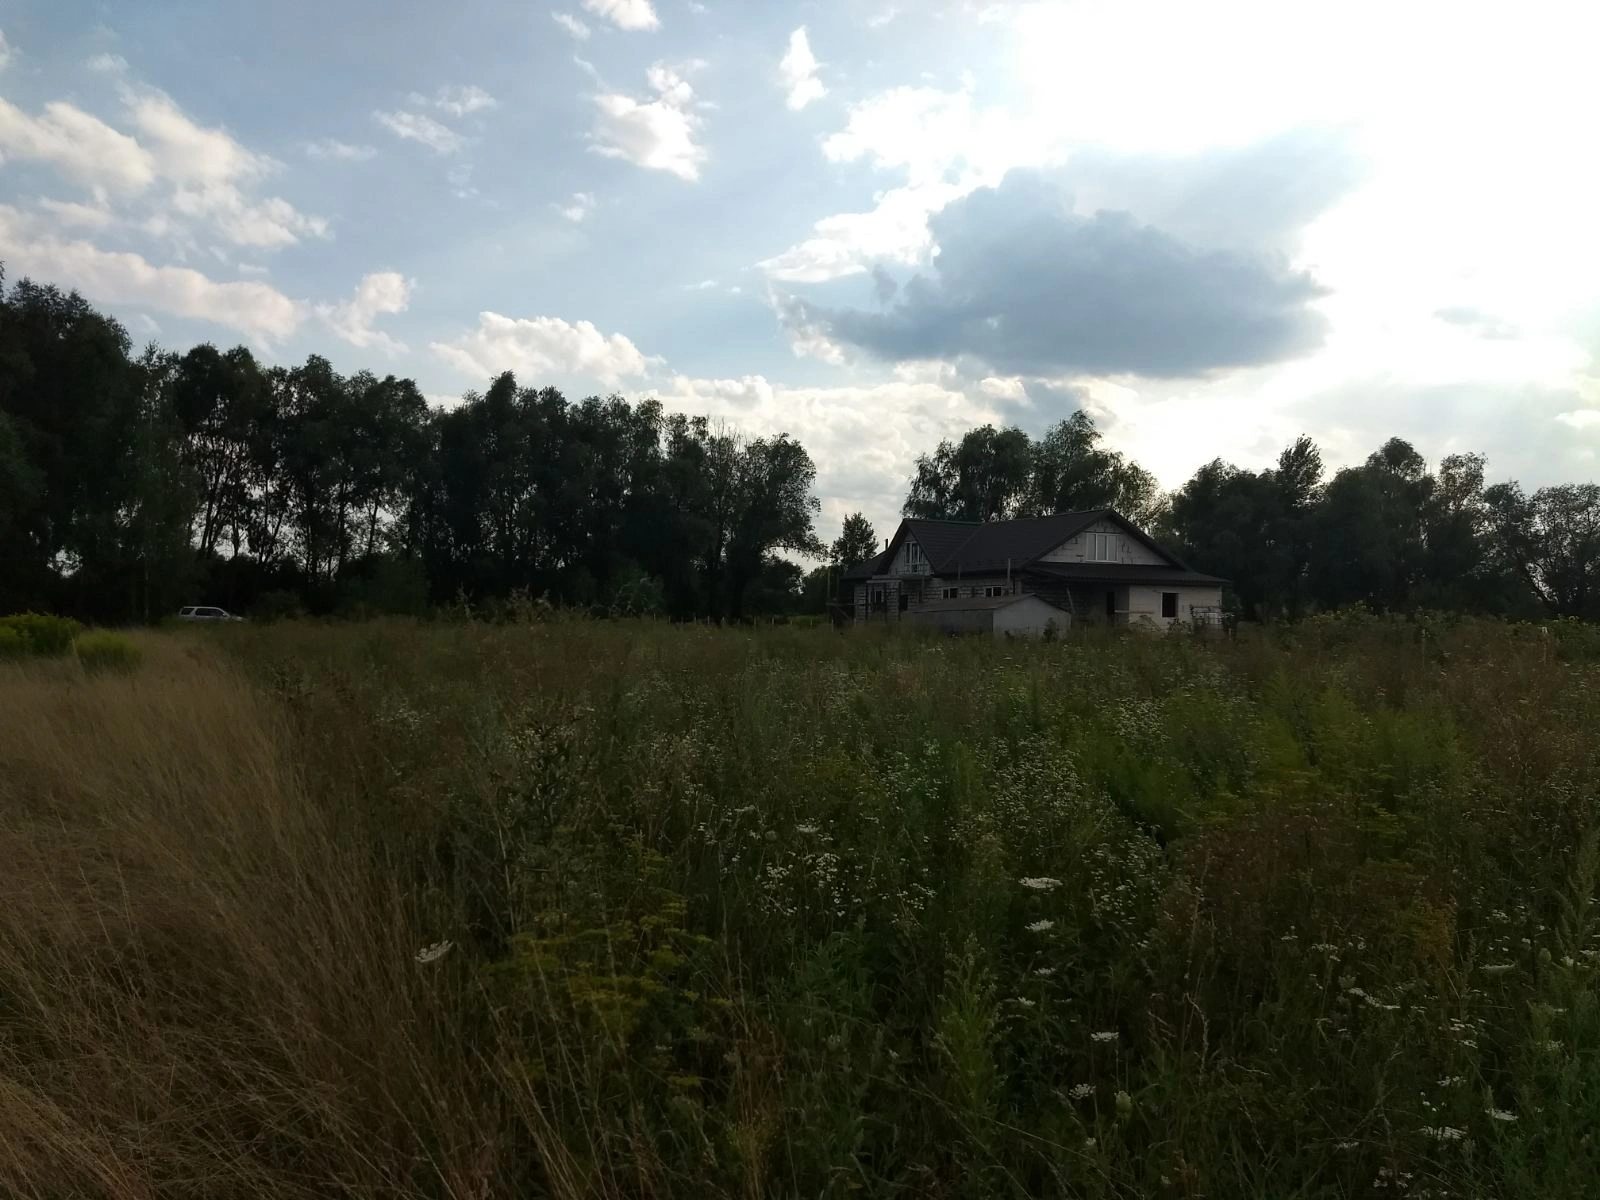 Land for sale for residential construction. Semypolky, Brovary. 